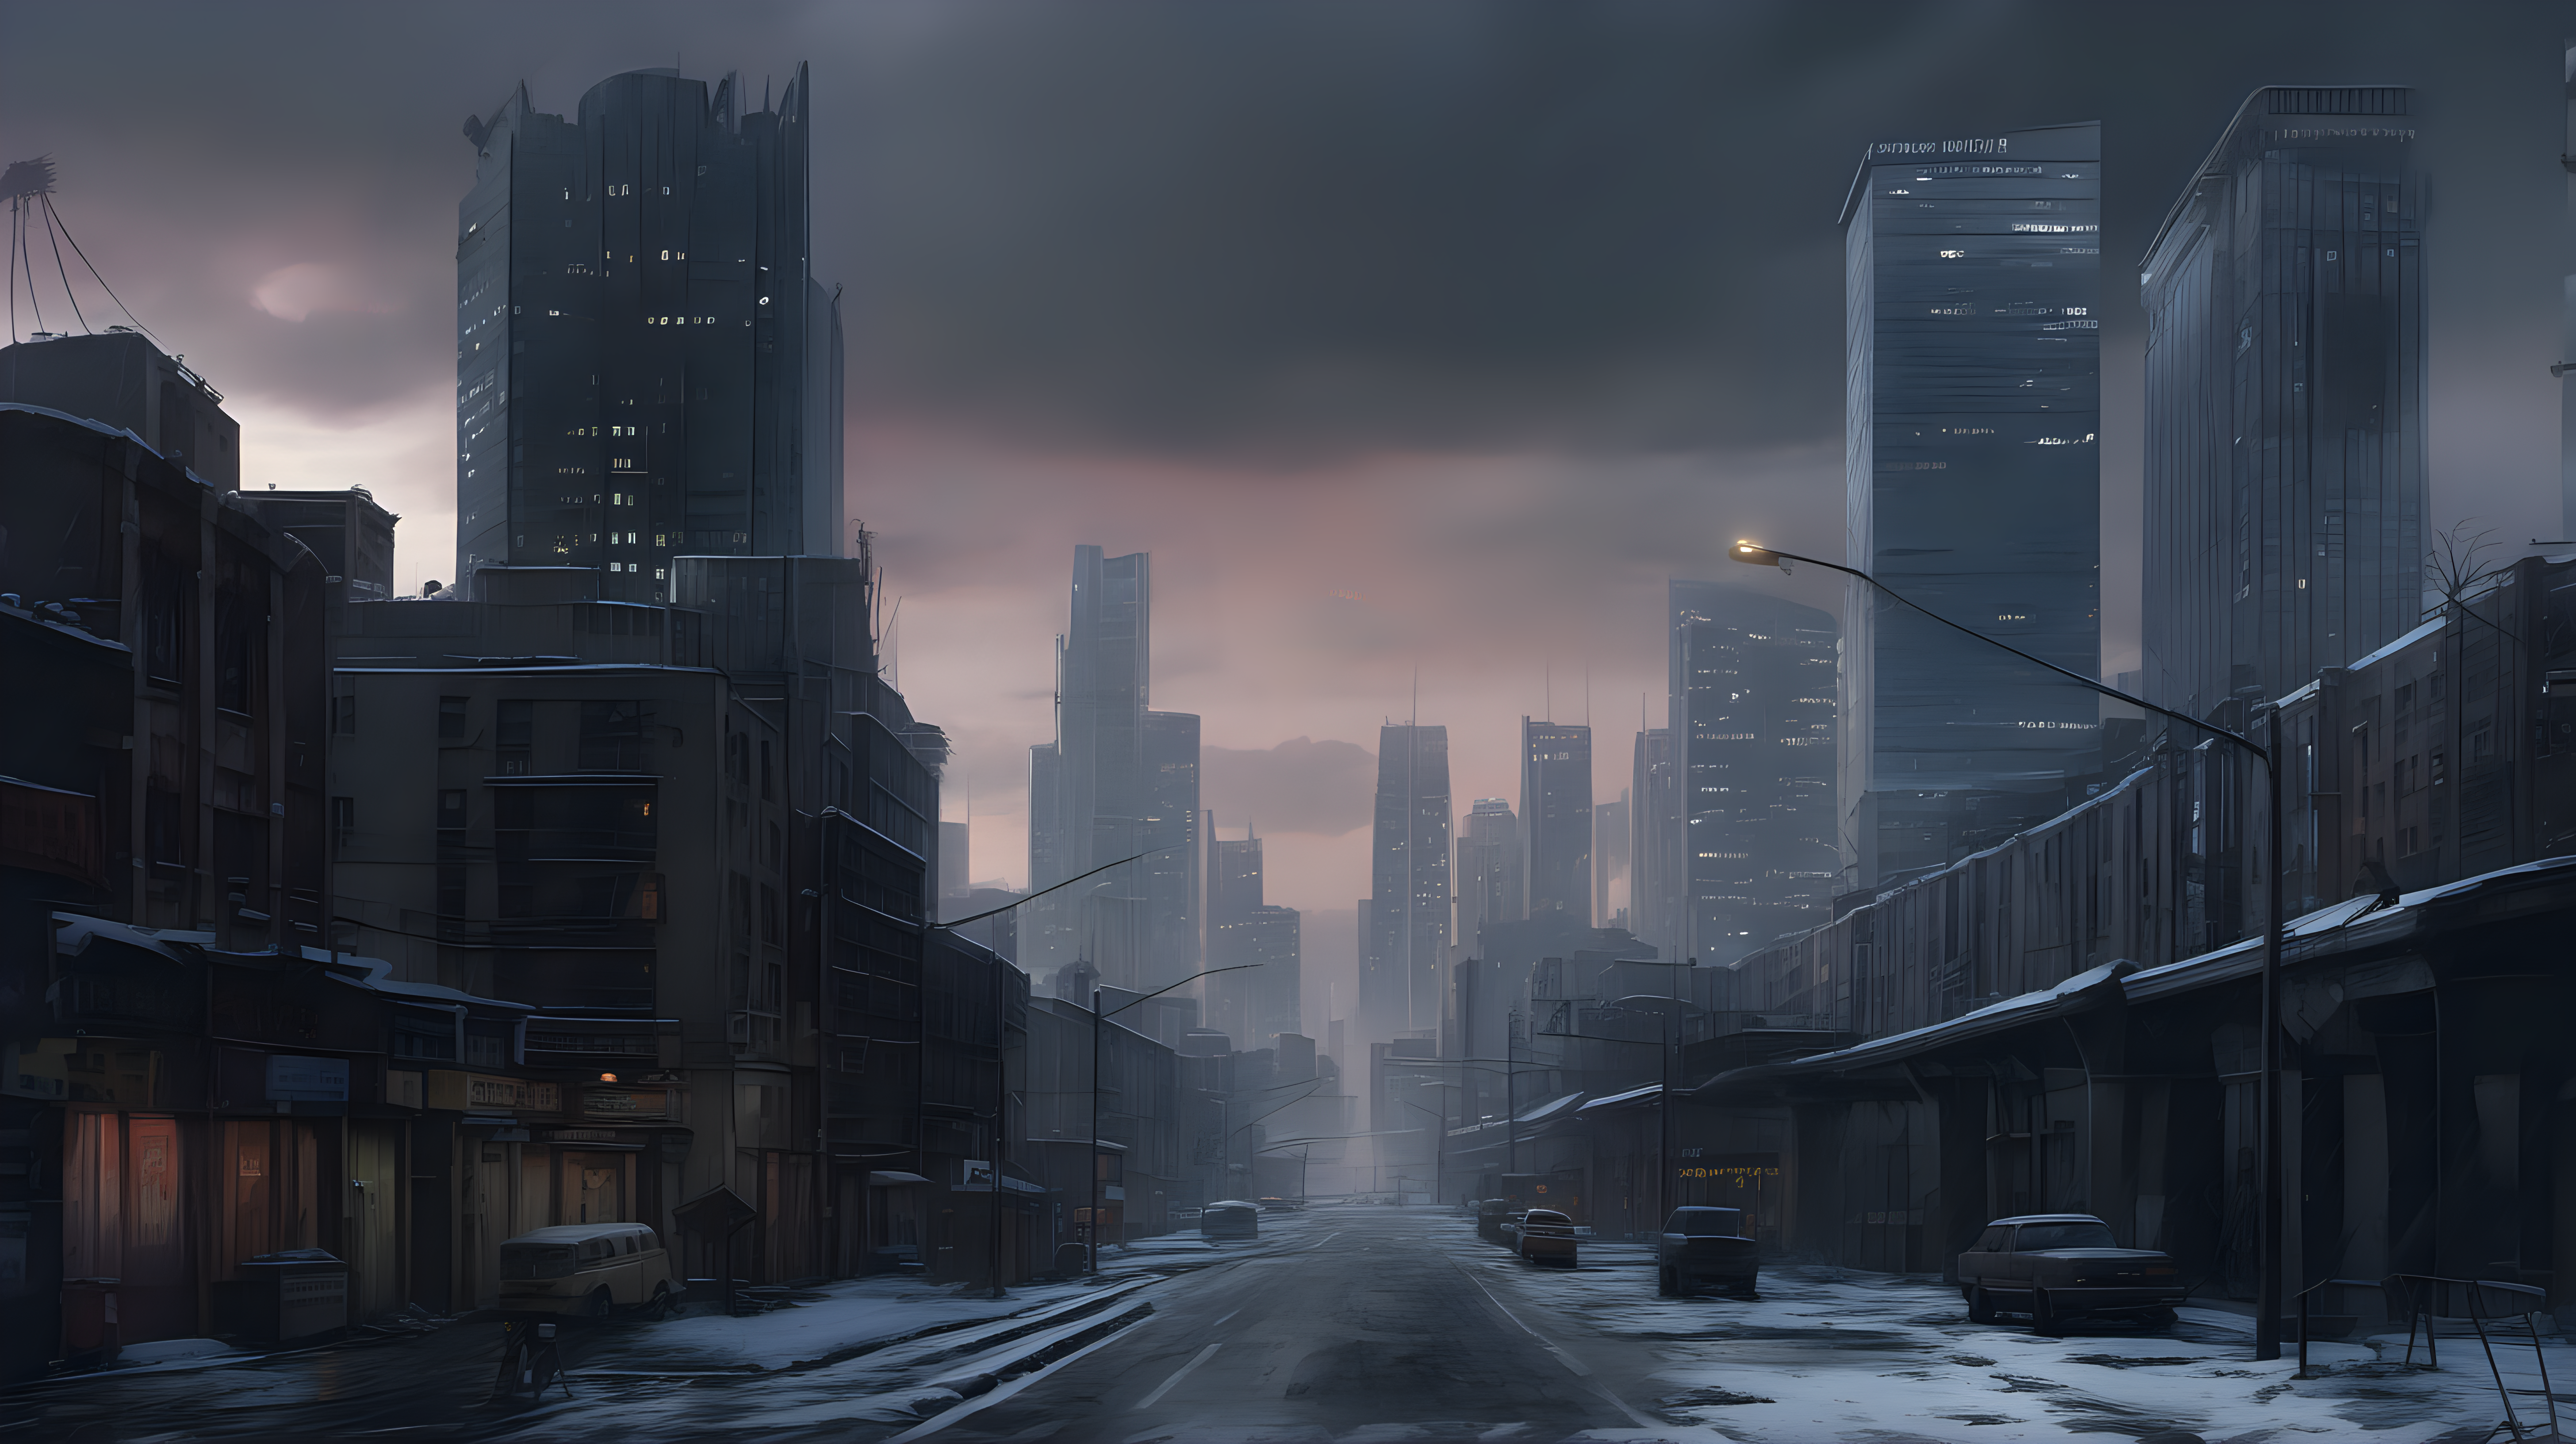 A deserted large city in winter at dusk